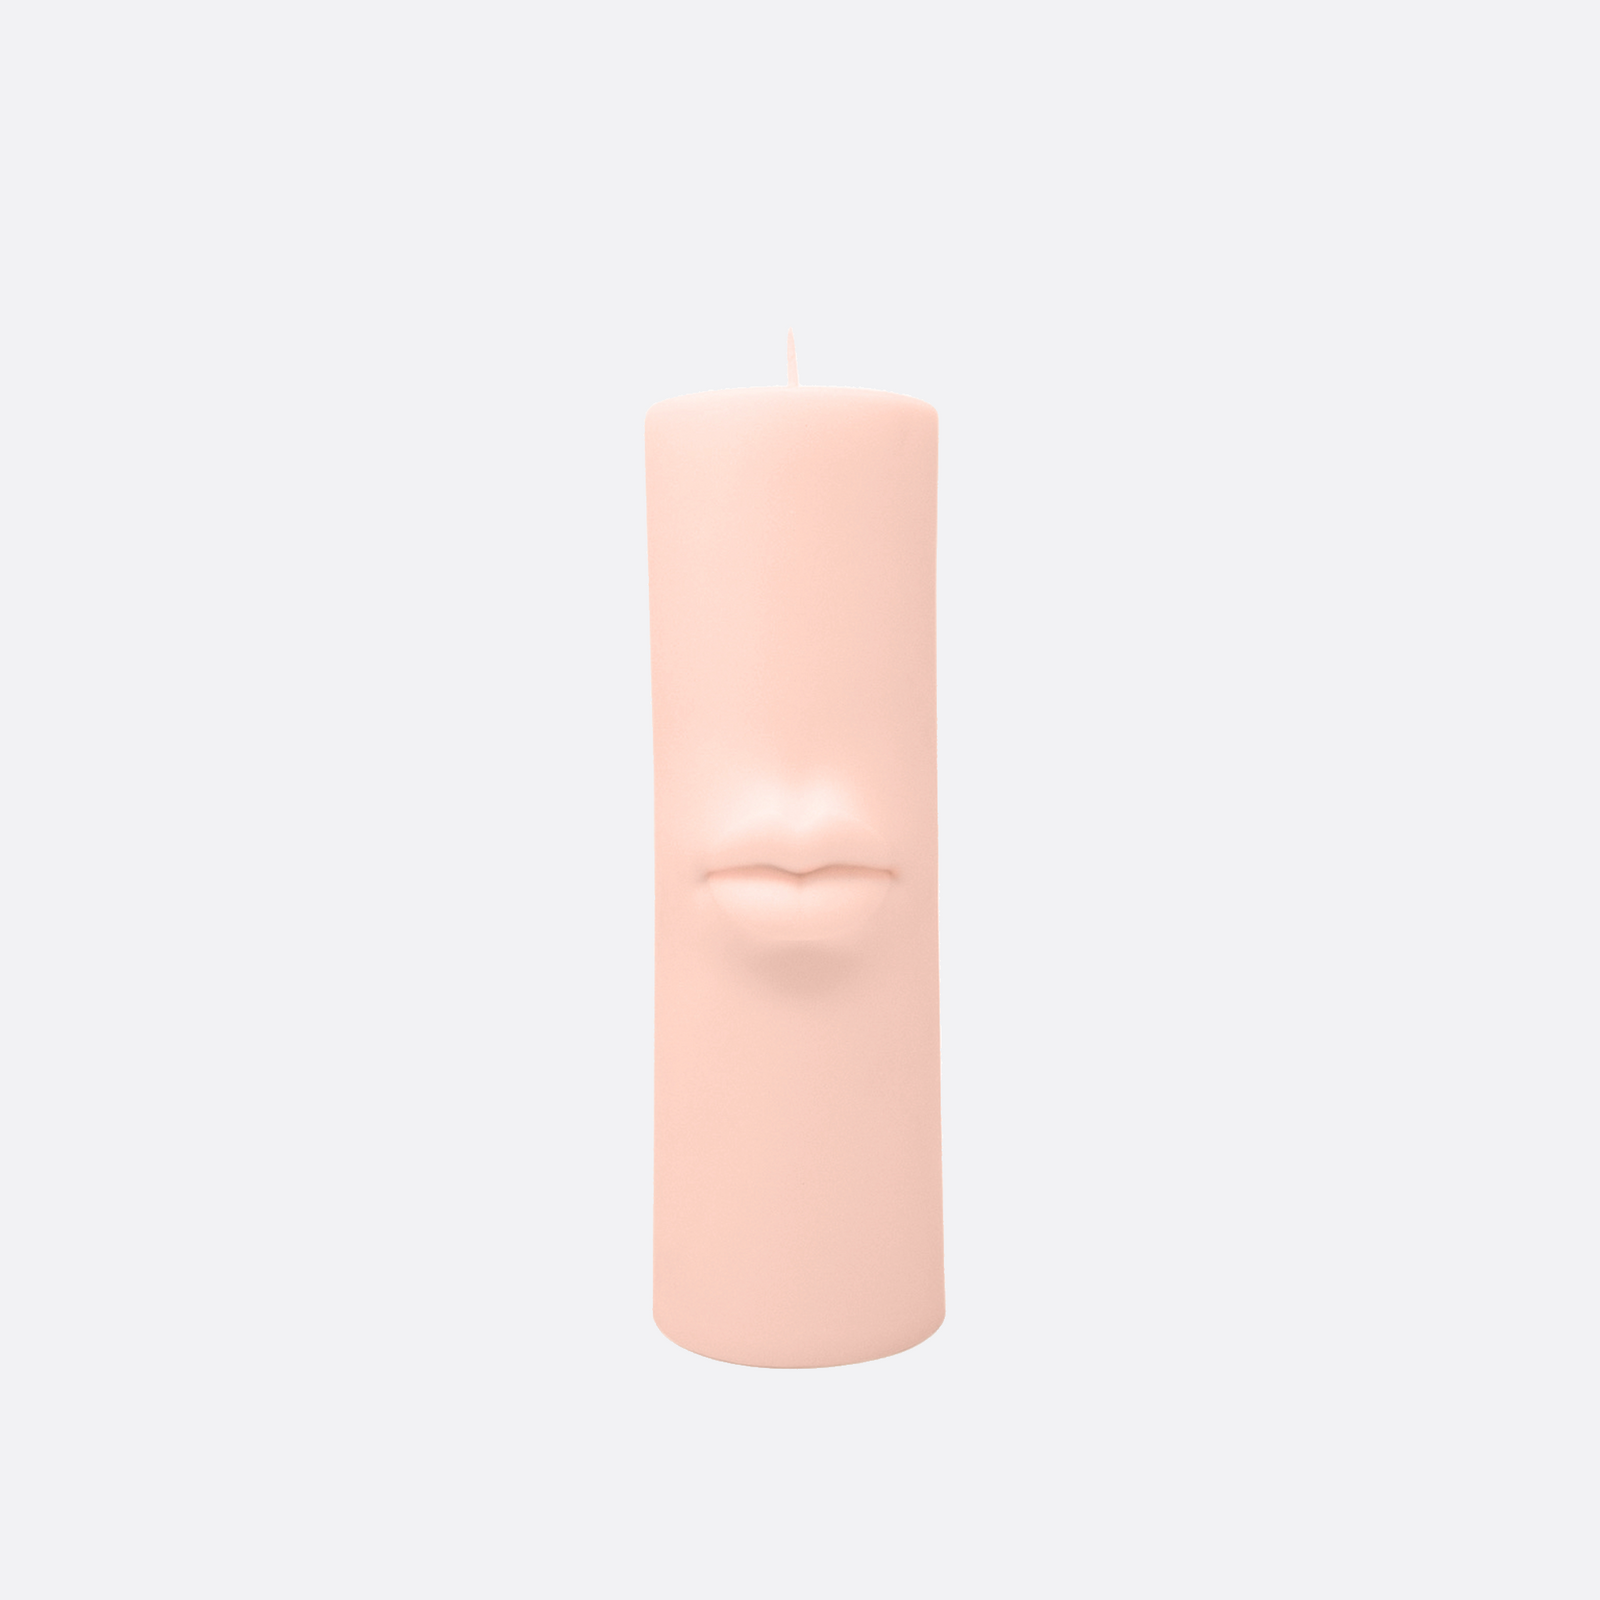 Lips Form Candle, blush pink